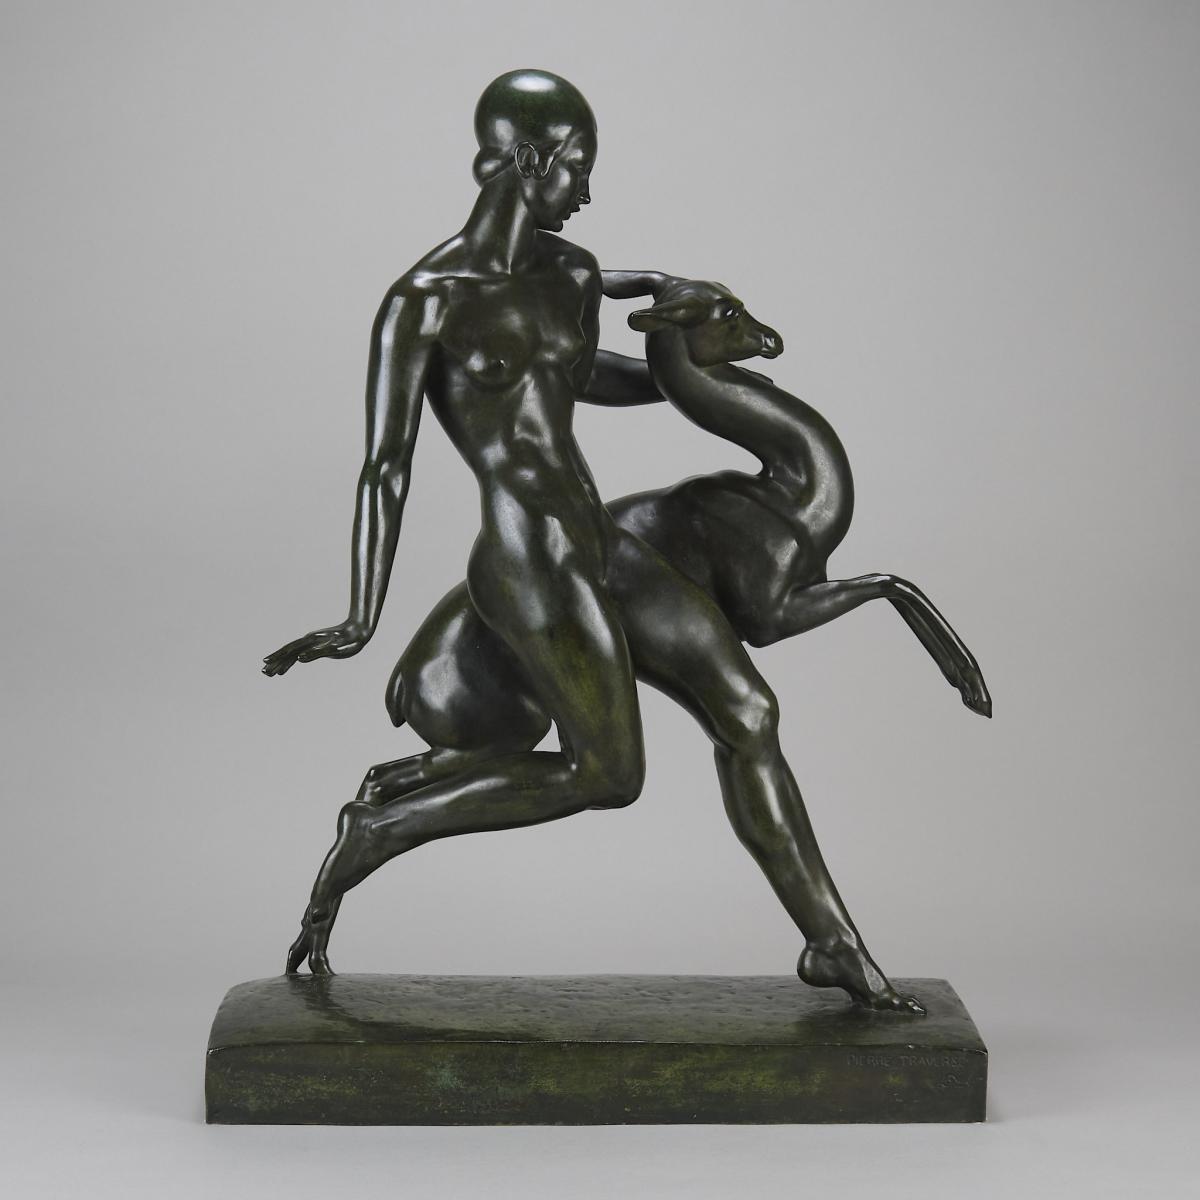 Early 20th Century Art Deco Bronze Sculpture entitled "Deer and Nymph" Pierre Traverse